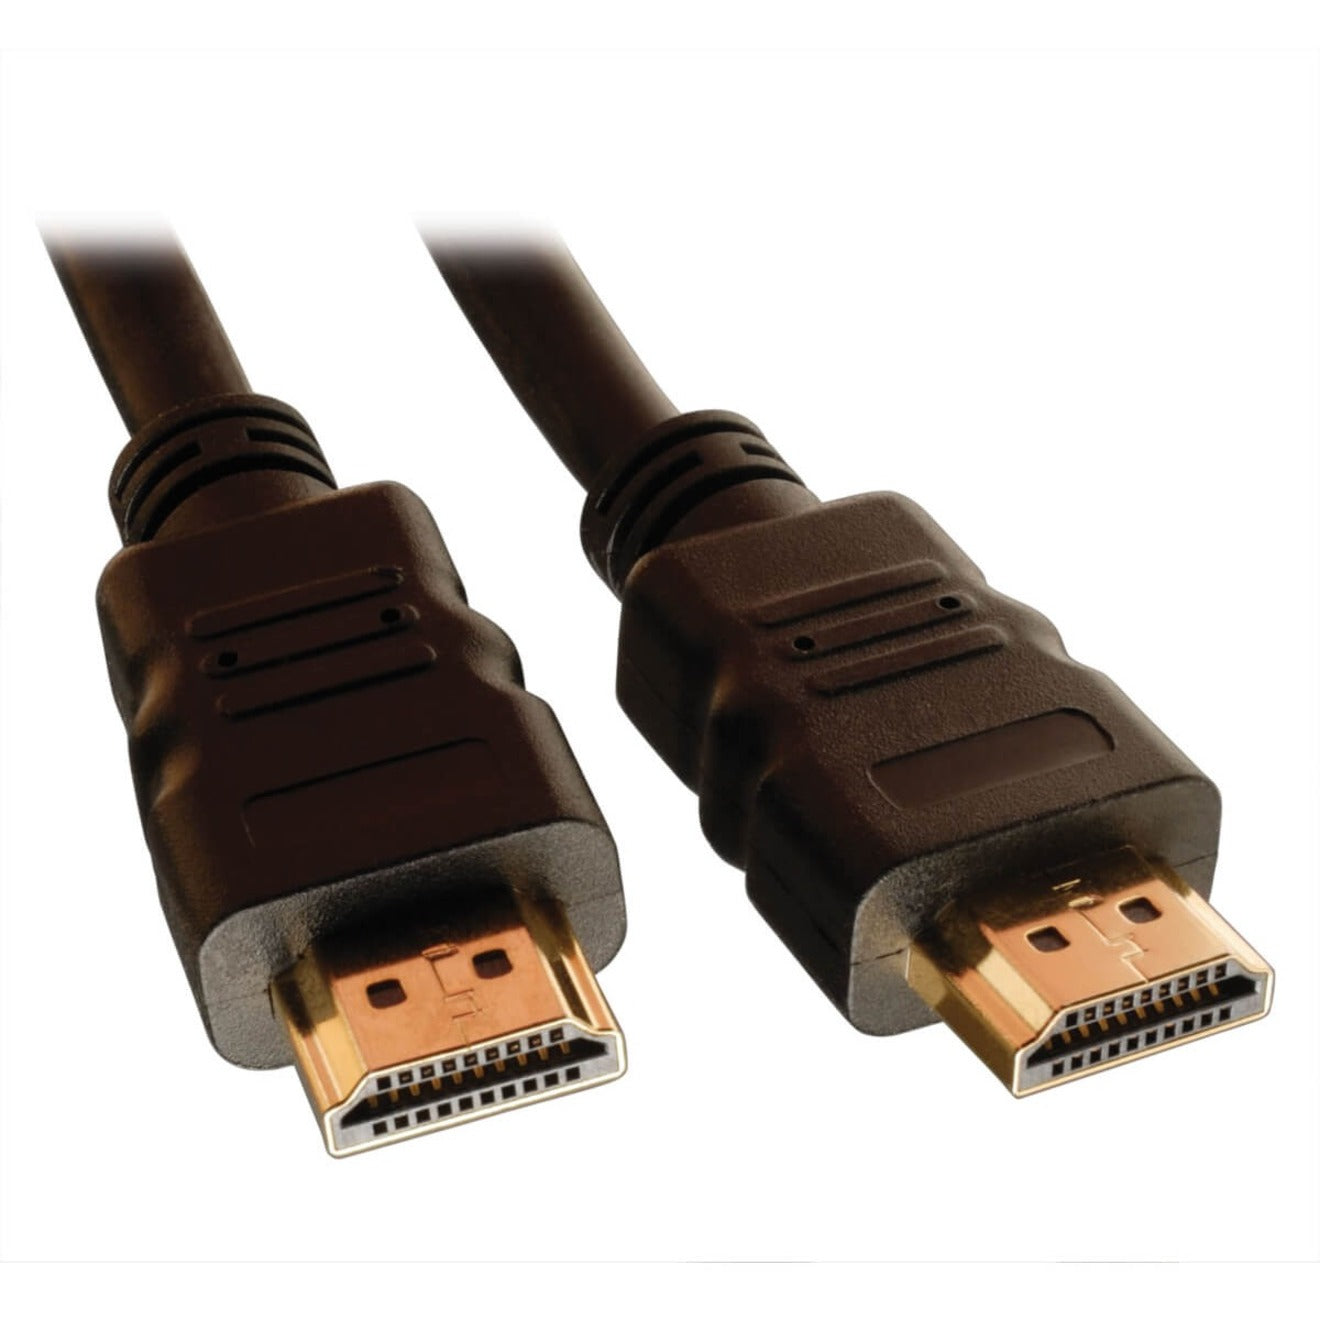 Tripp Lite P569-001 HDMI Audio/Video with Ethernet Cable, 1 ft, Gold Plated Connectors, 18 Gbit/s Data Transfer Rate